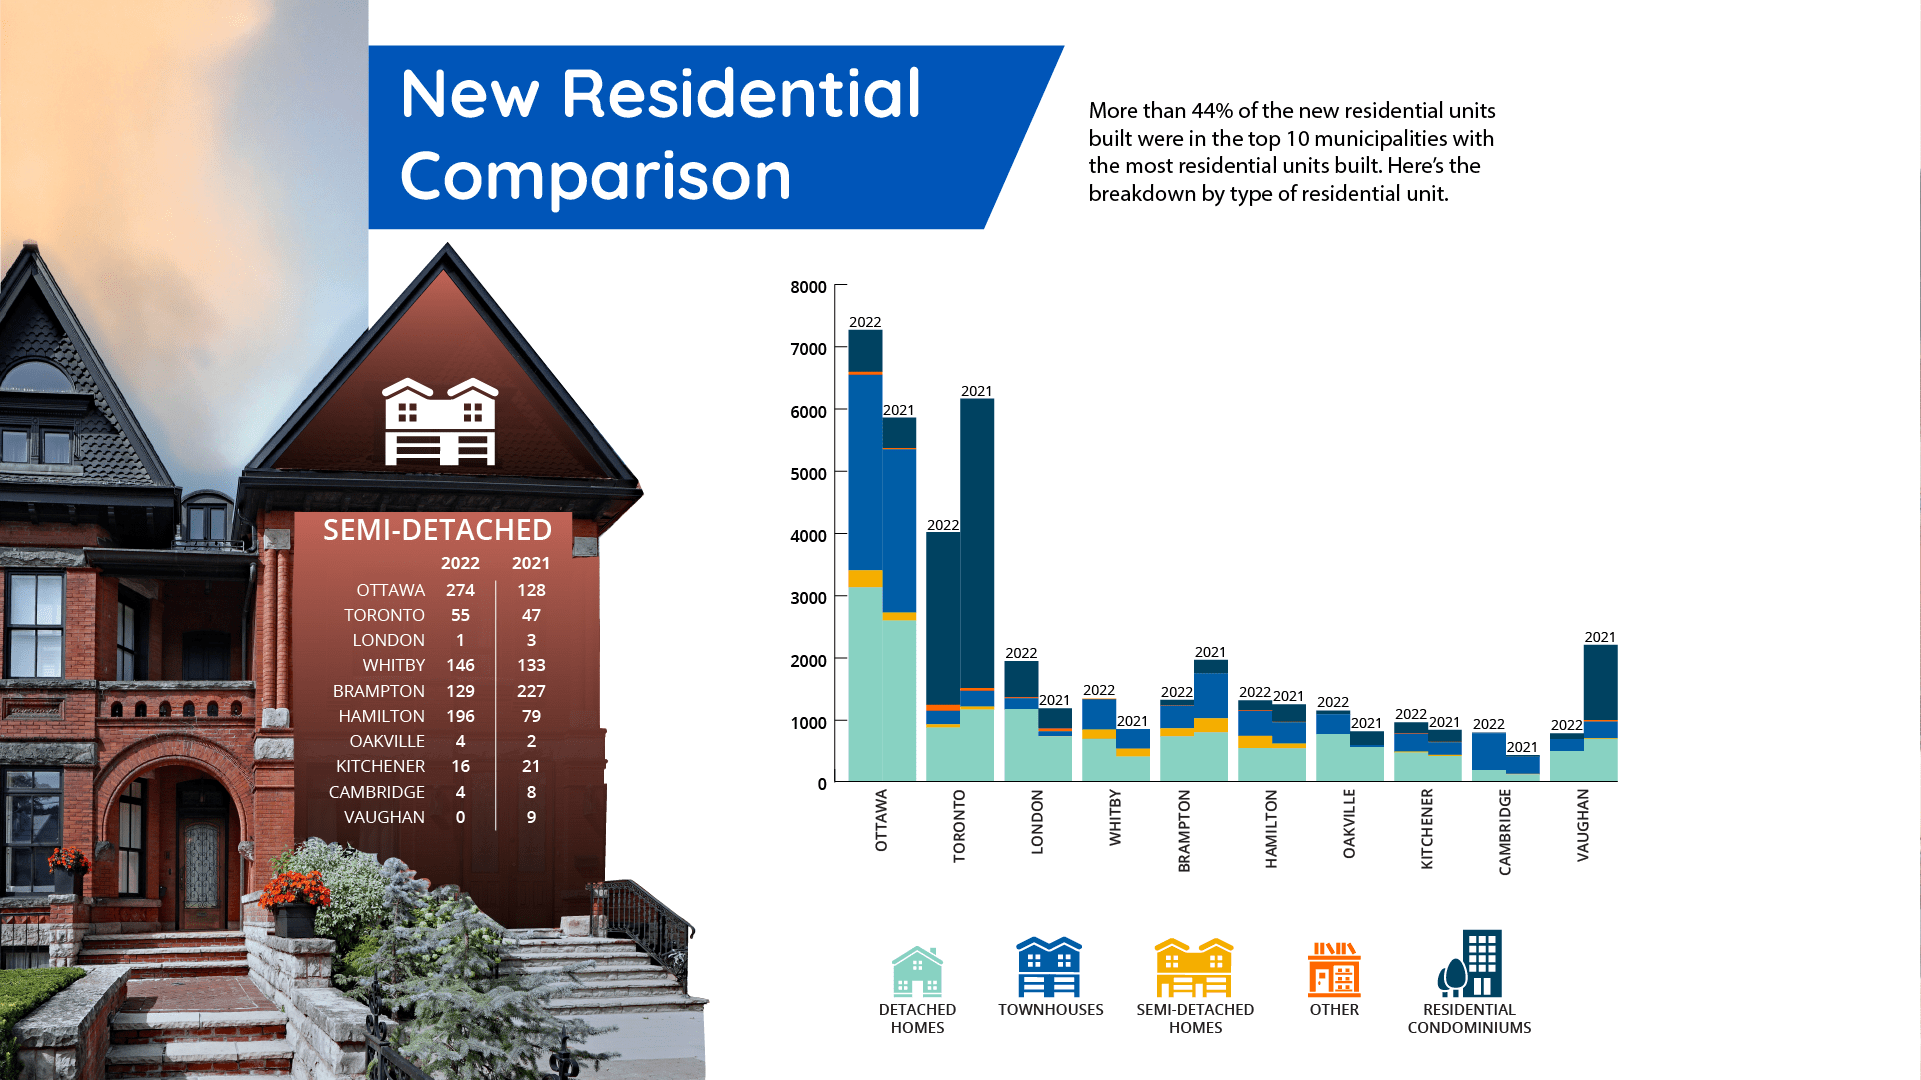 Visual of the top 10 municipalities comparing the number of new residential units built.